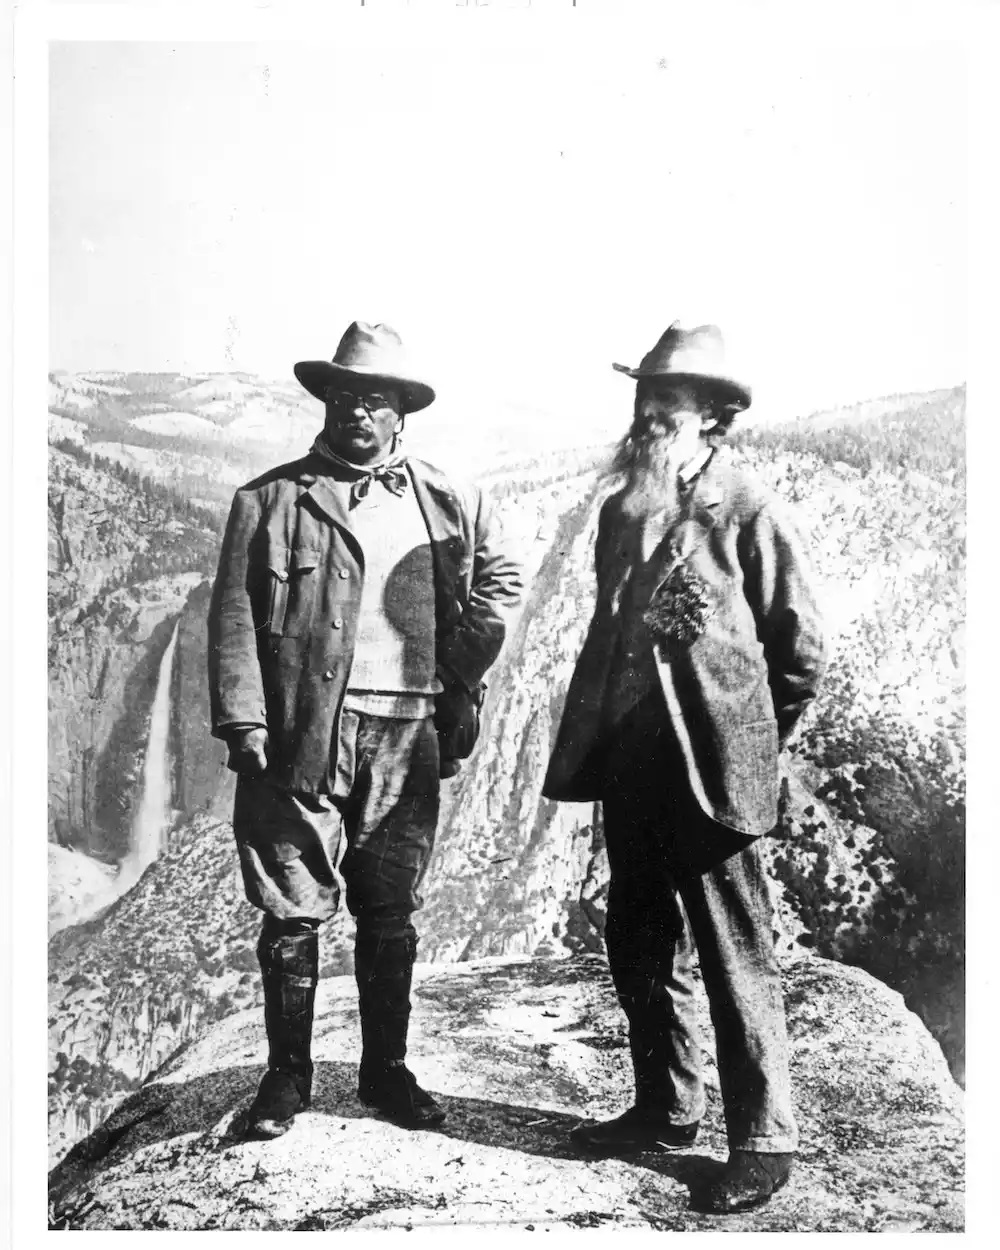 Yosemite photograph of President Roosevelt and naturalist John Muir, who influenced Roosevelt’s views on nature conservancy. (National Park Service)